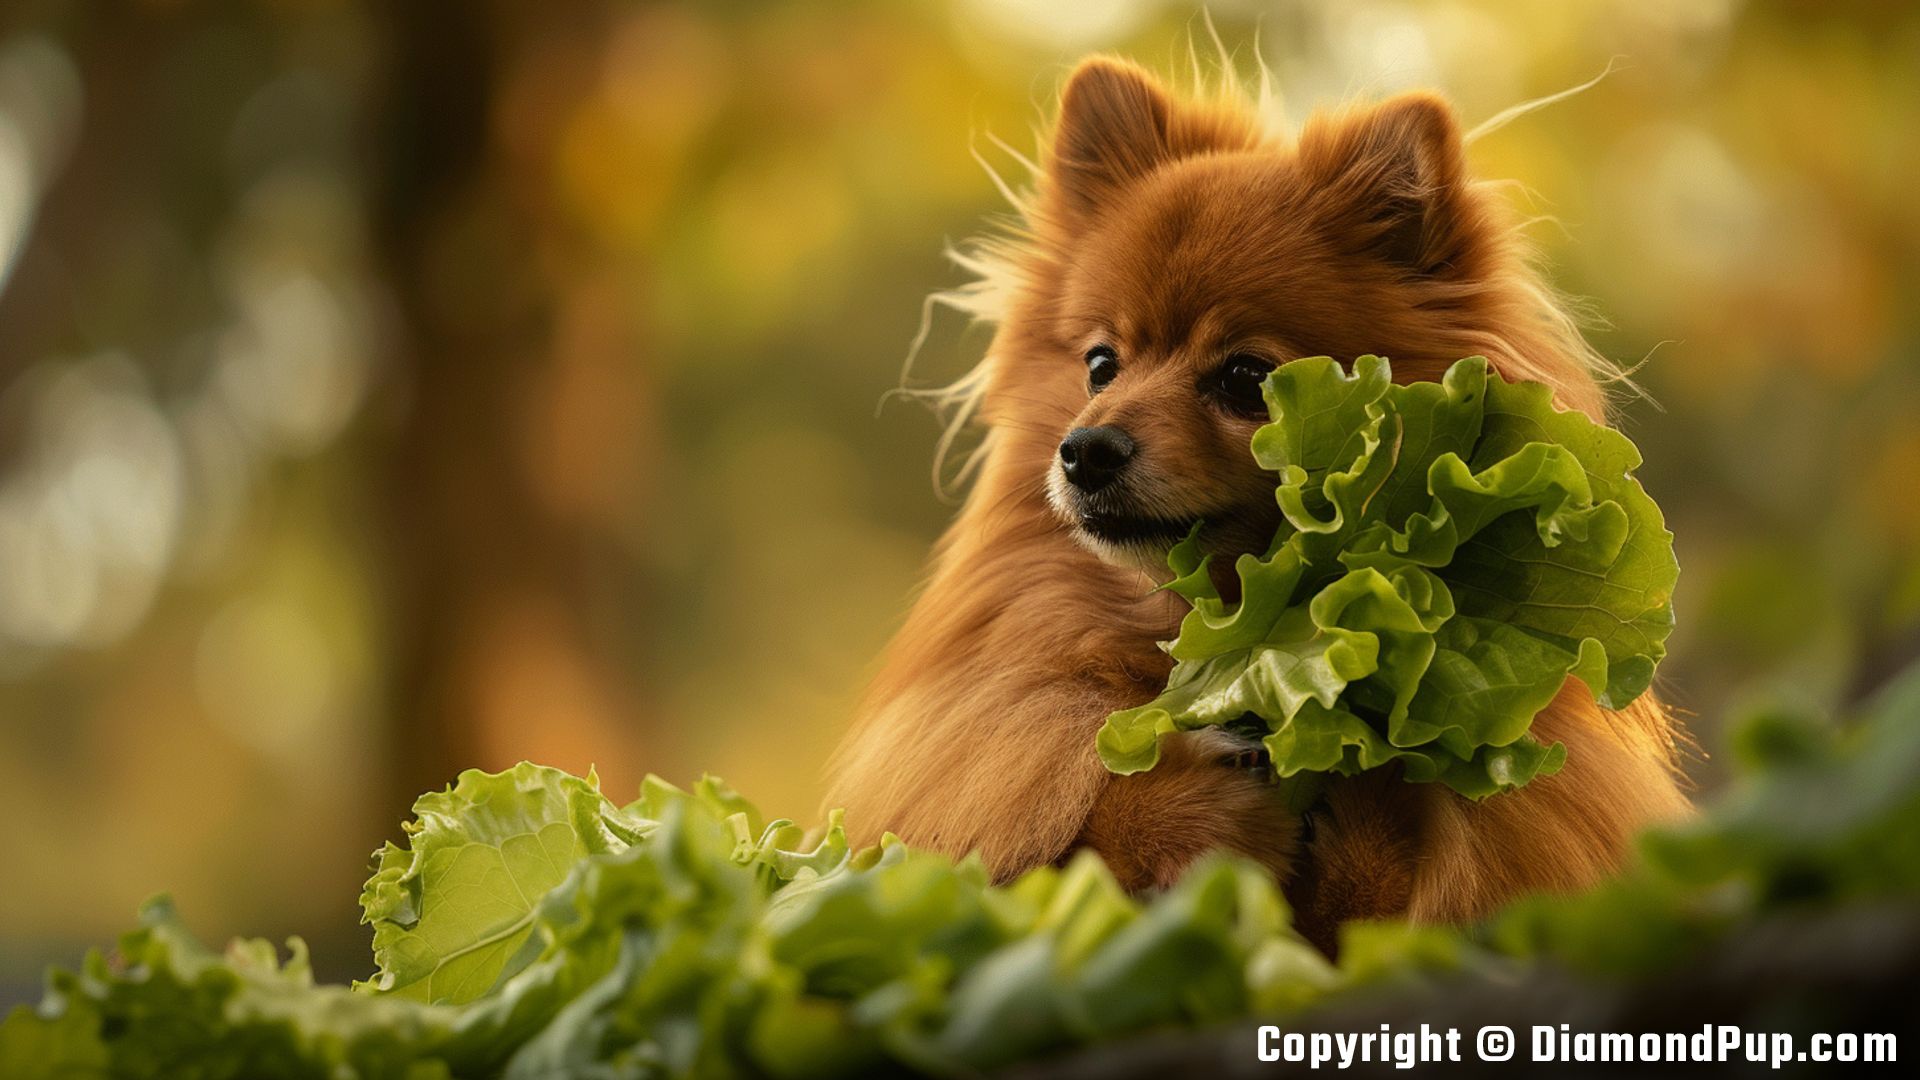 Photograph of an Adorable Pomeranian Snacking on Lettuce